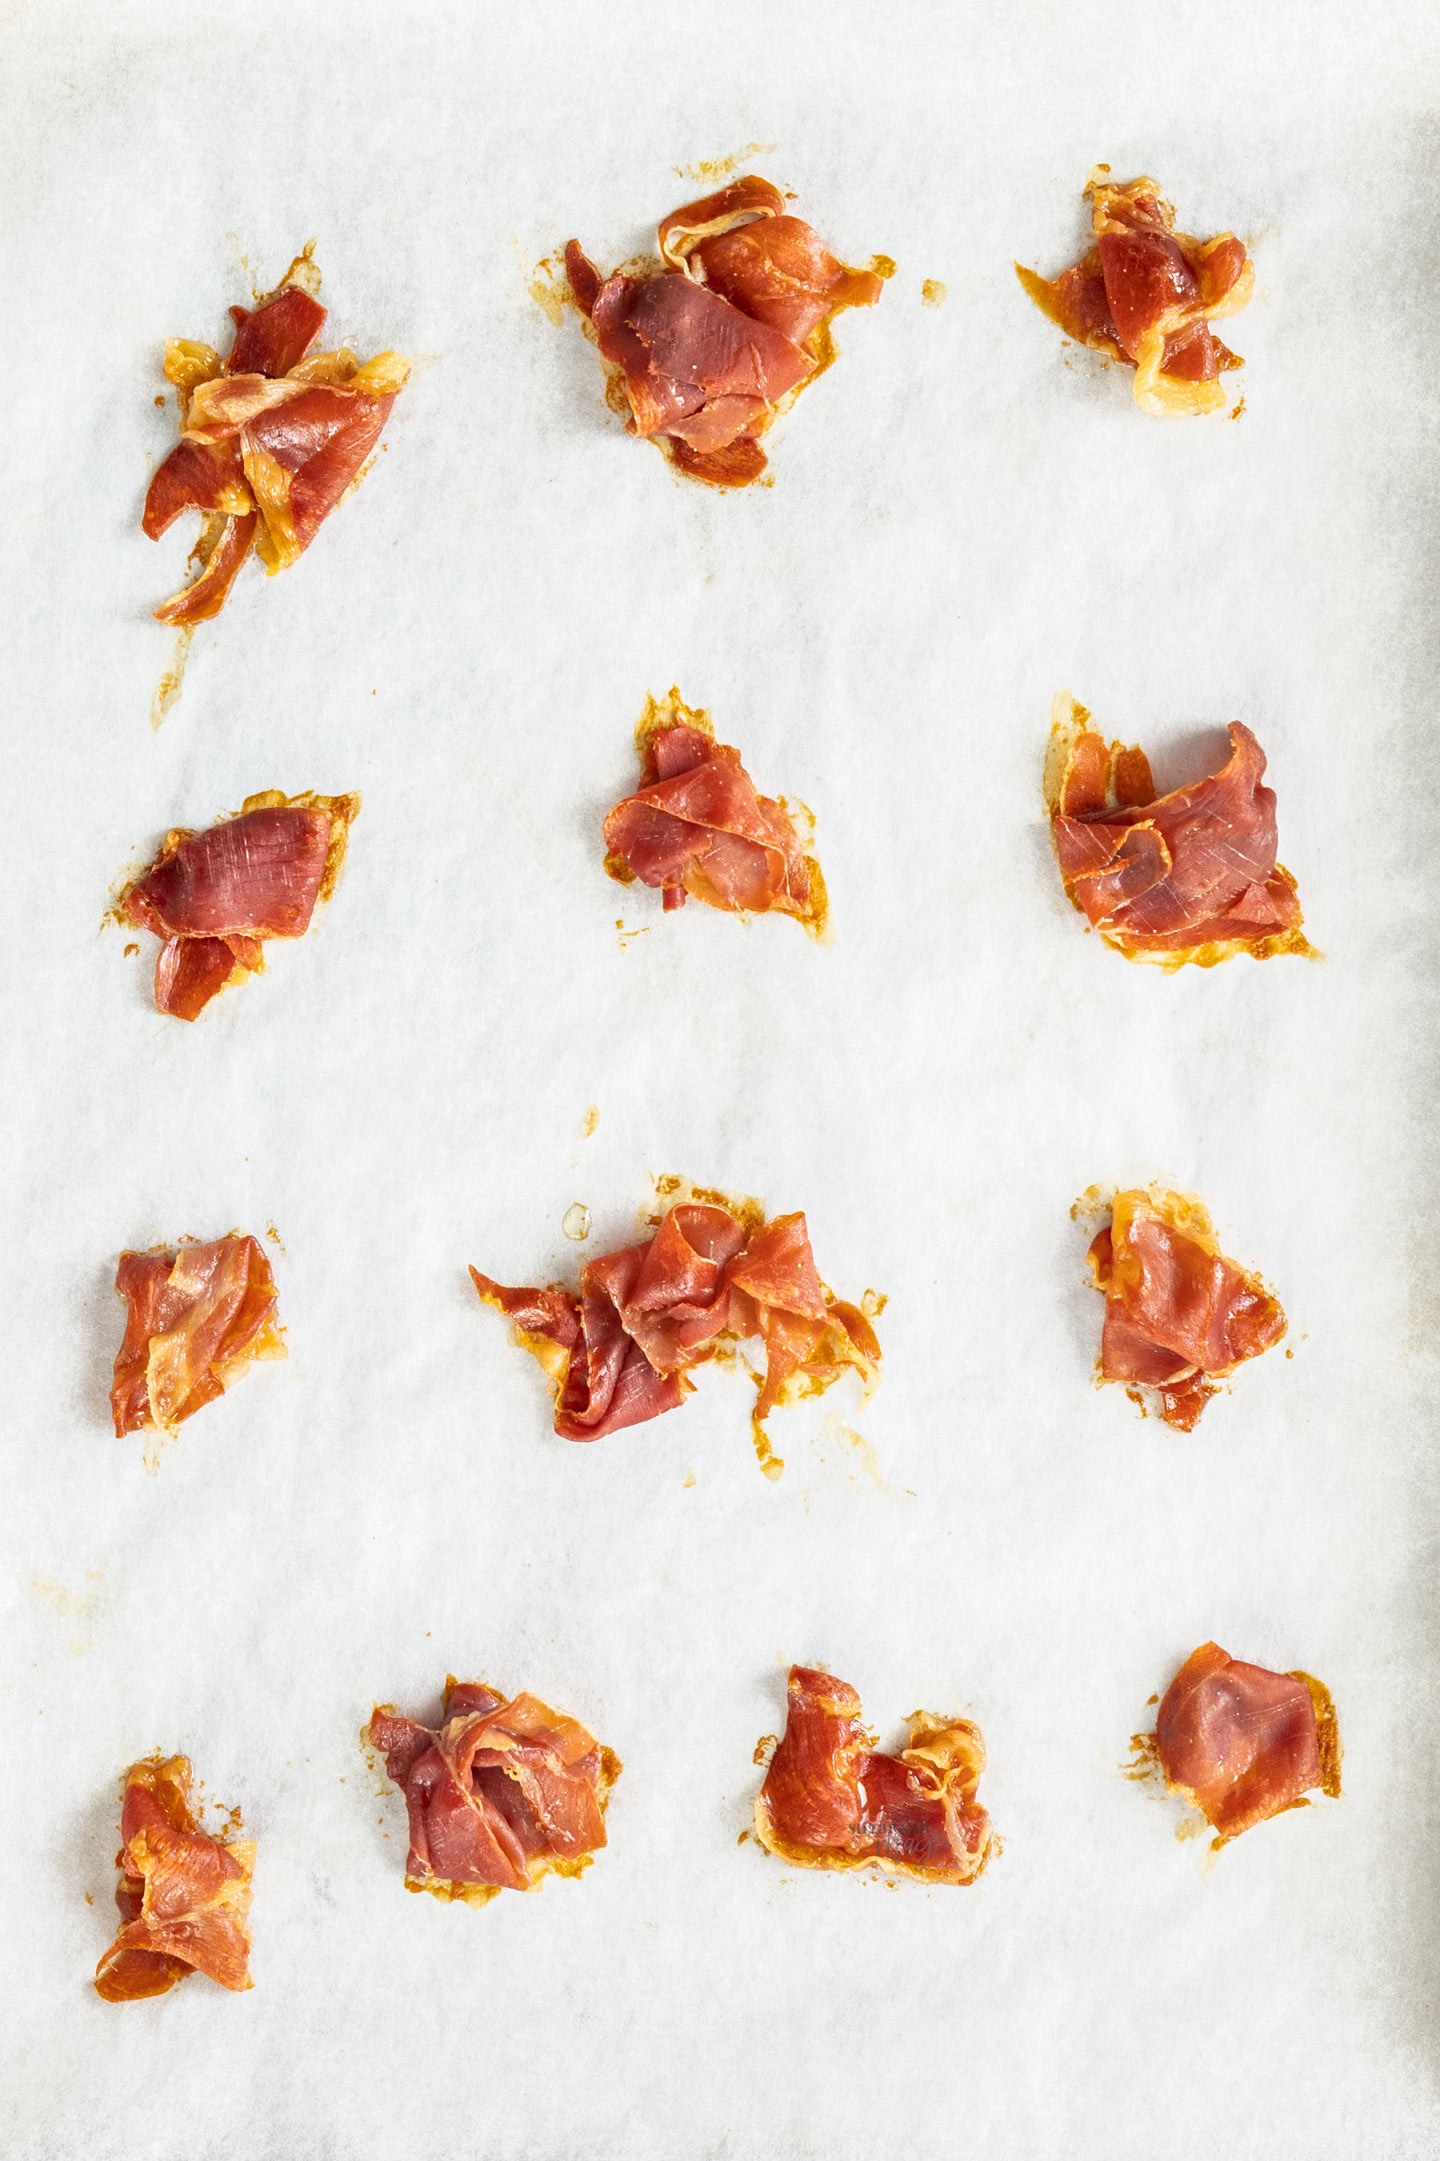 Small piles of crispy prosciutto on a baking tray.